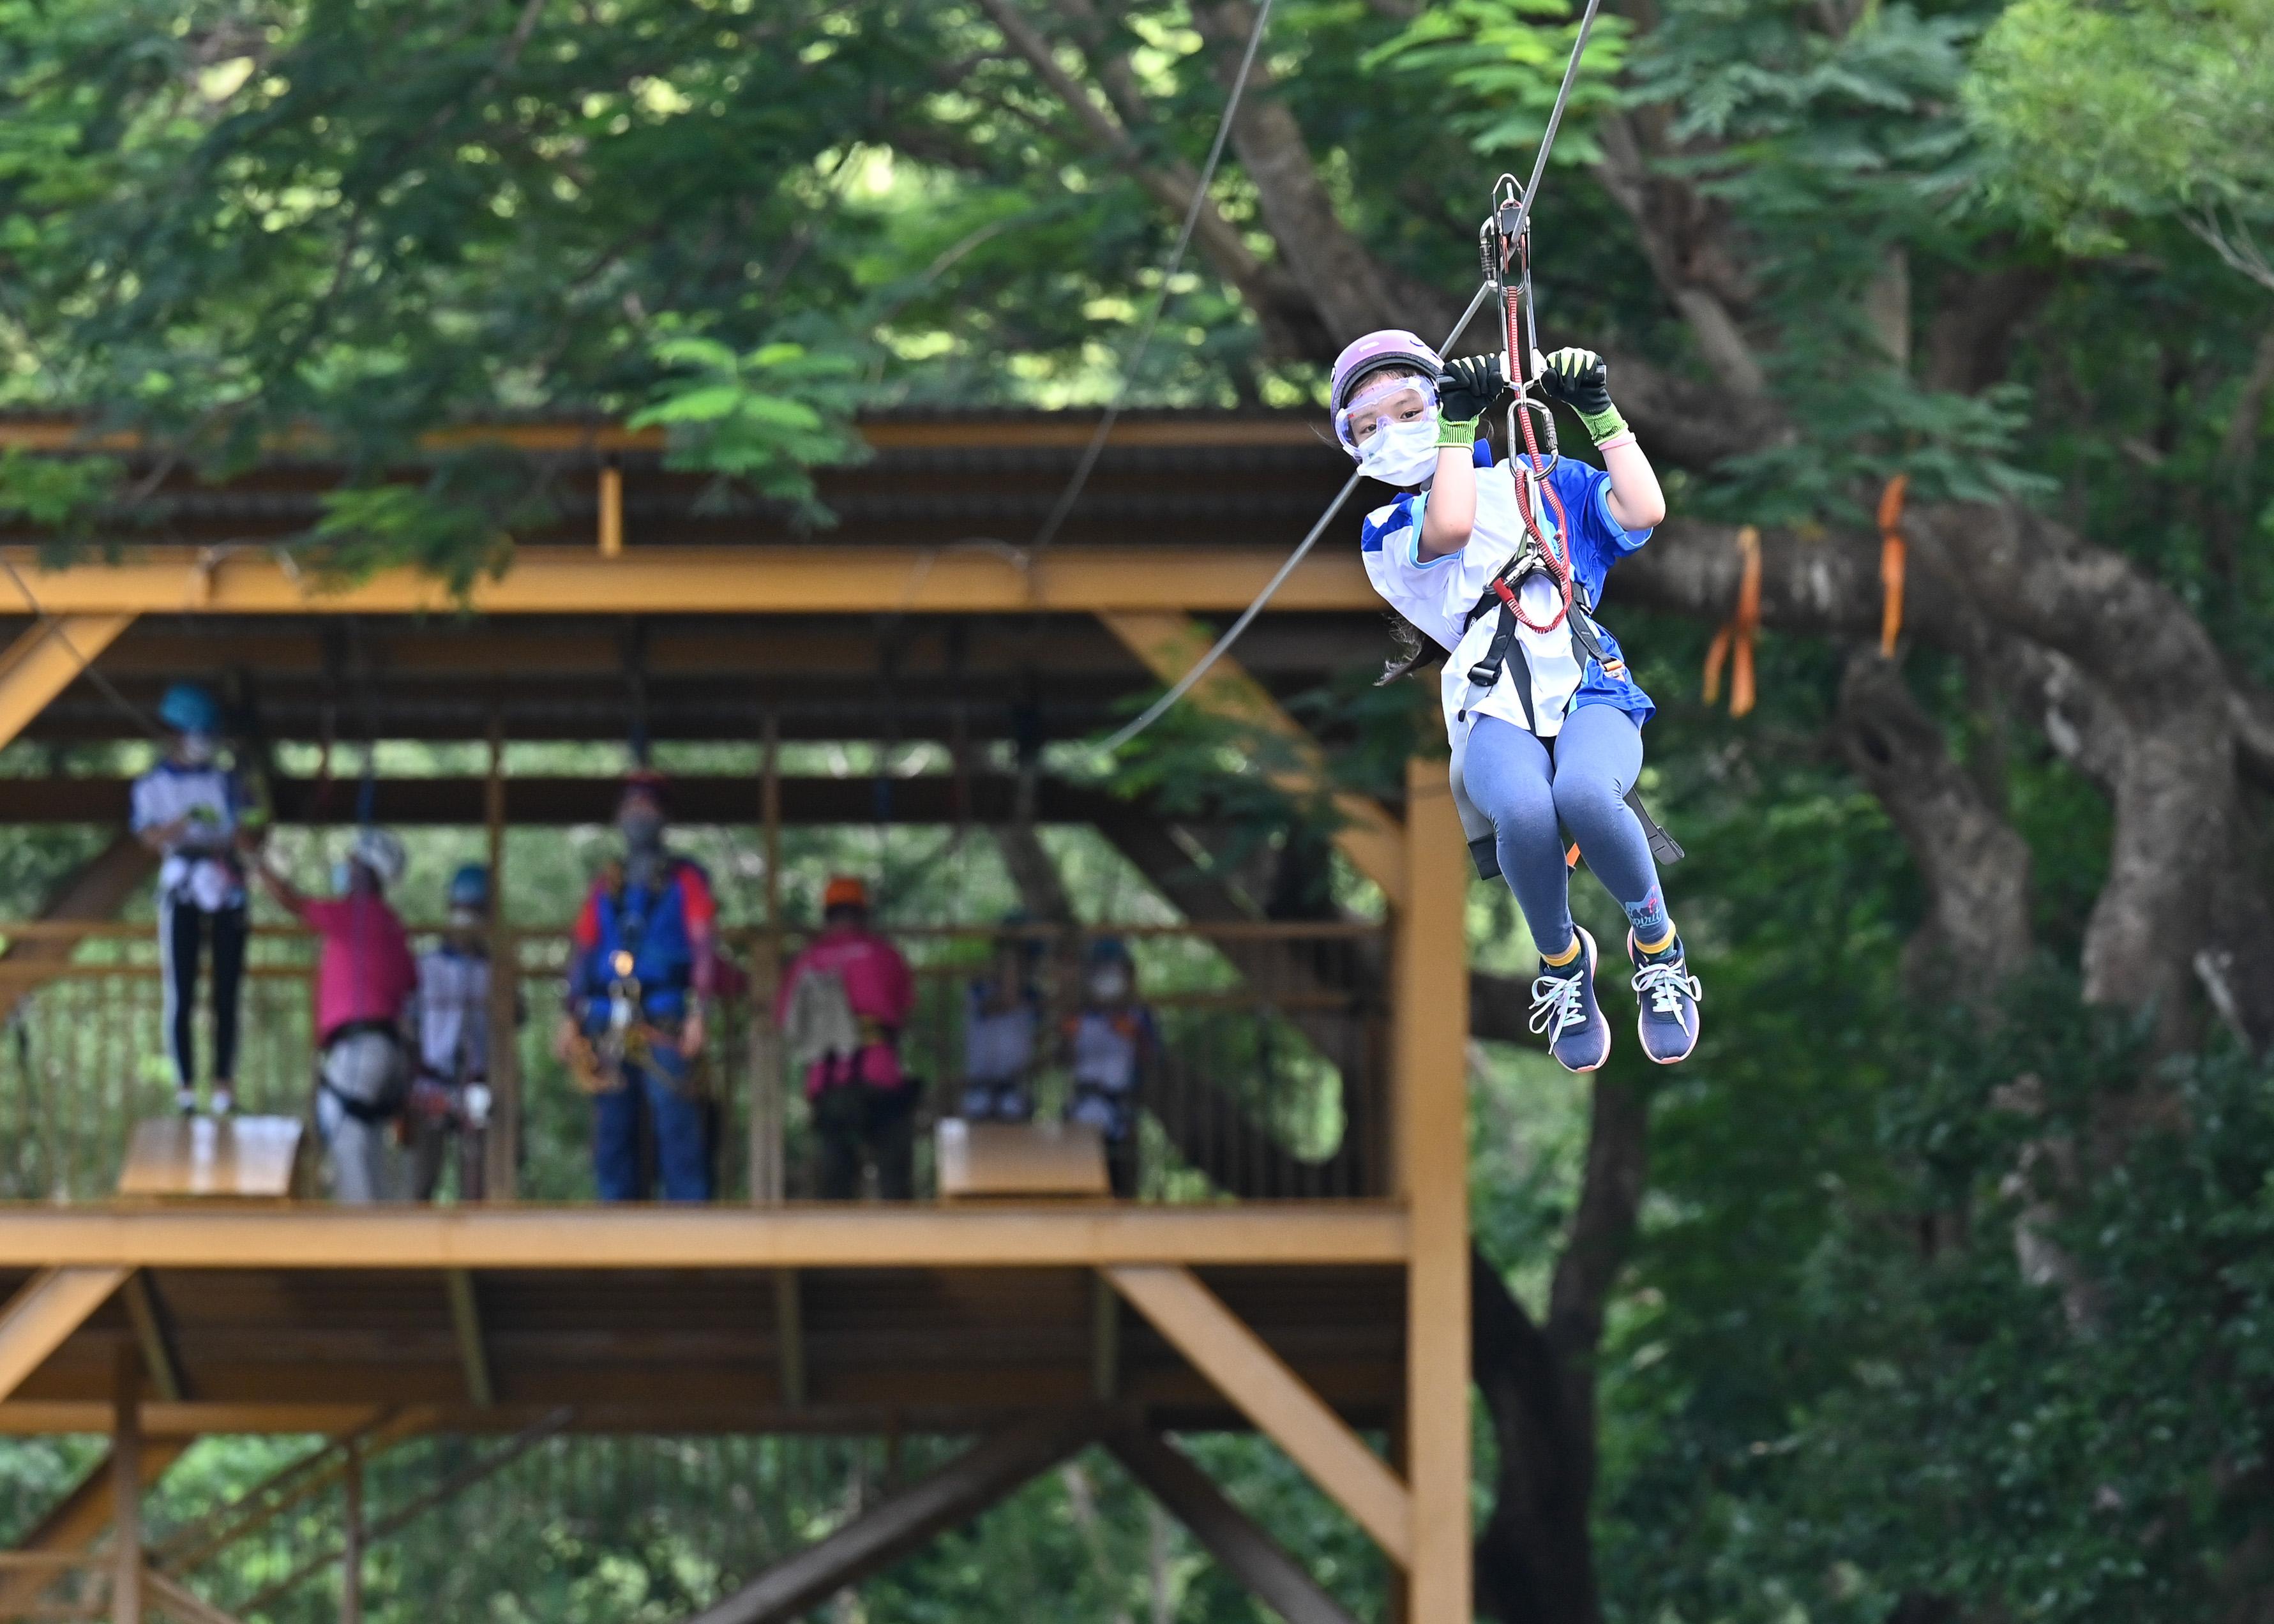 The Opening Ceremony of Junior Police Call Summer Camp 2022 was held today (August 16). Photo shows a participant taking part in the zip line activity.